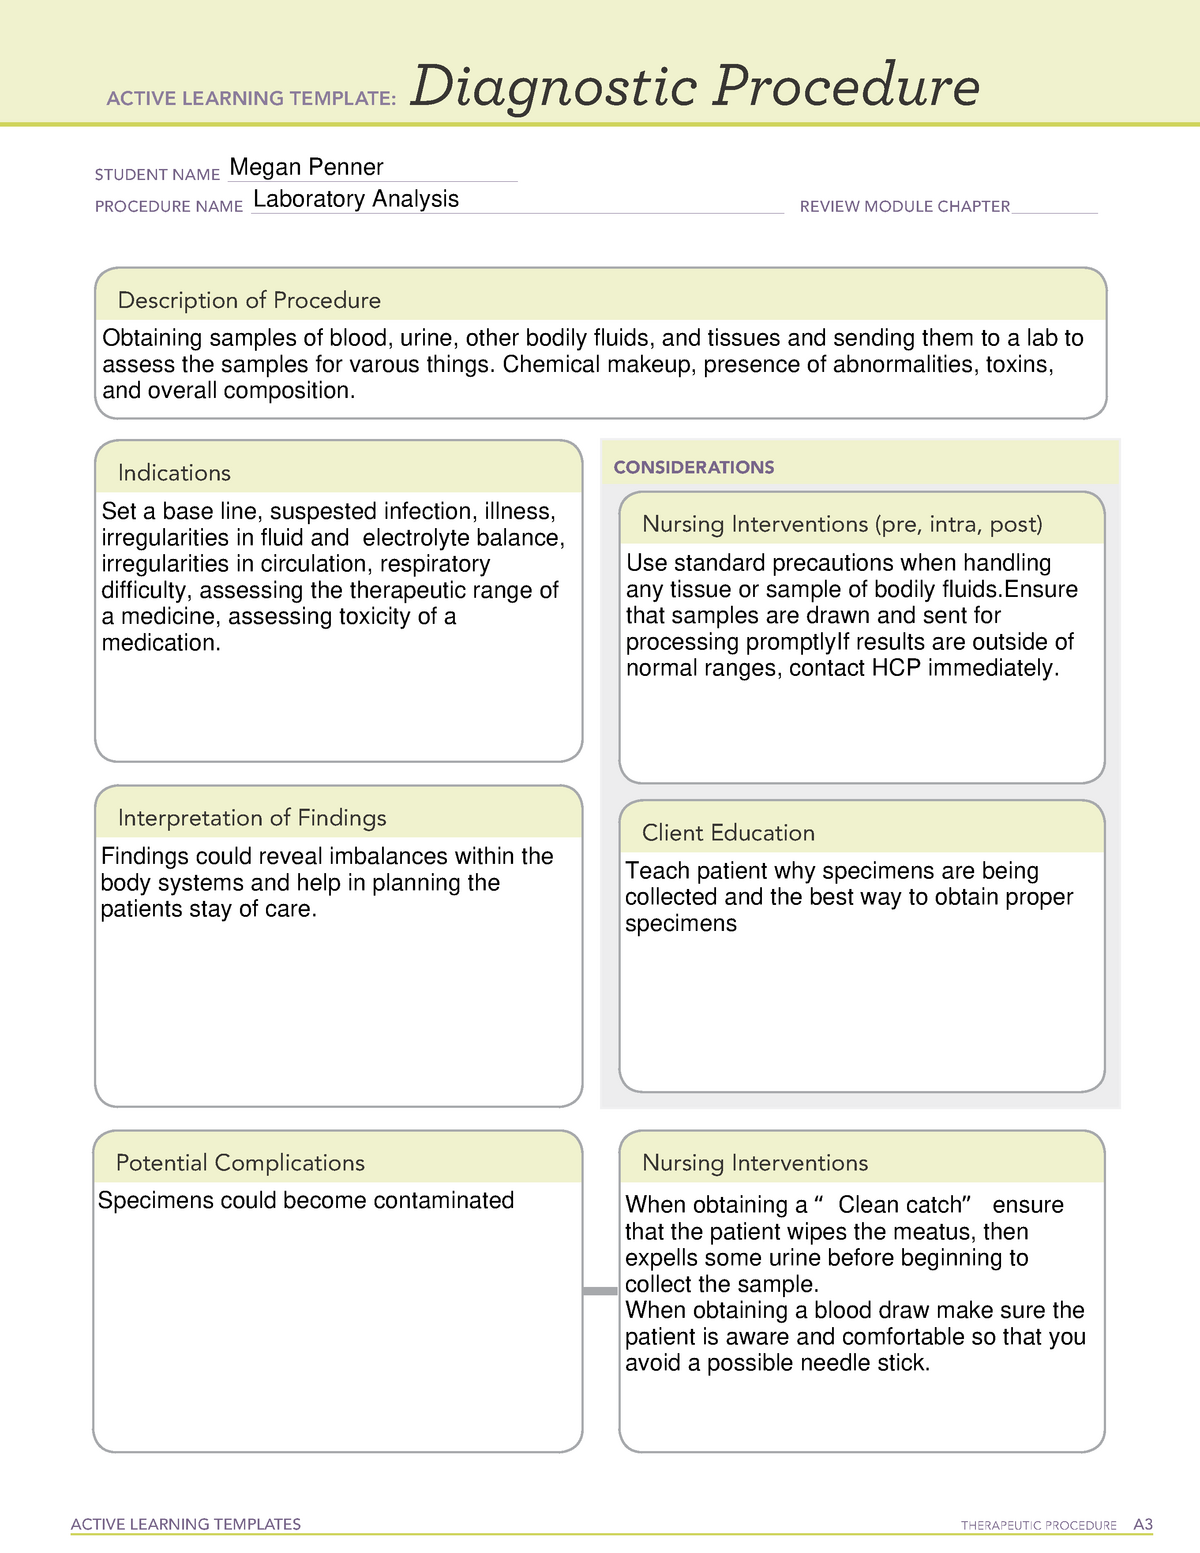 Active Learning Template Diagnostic Procedure form LAB ACTIVE